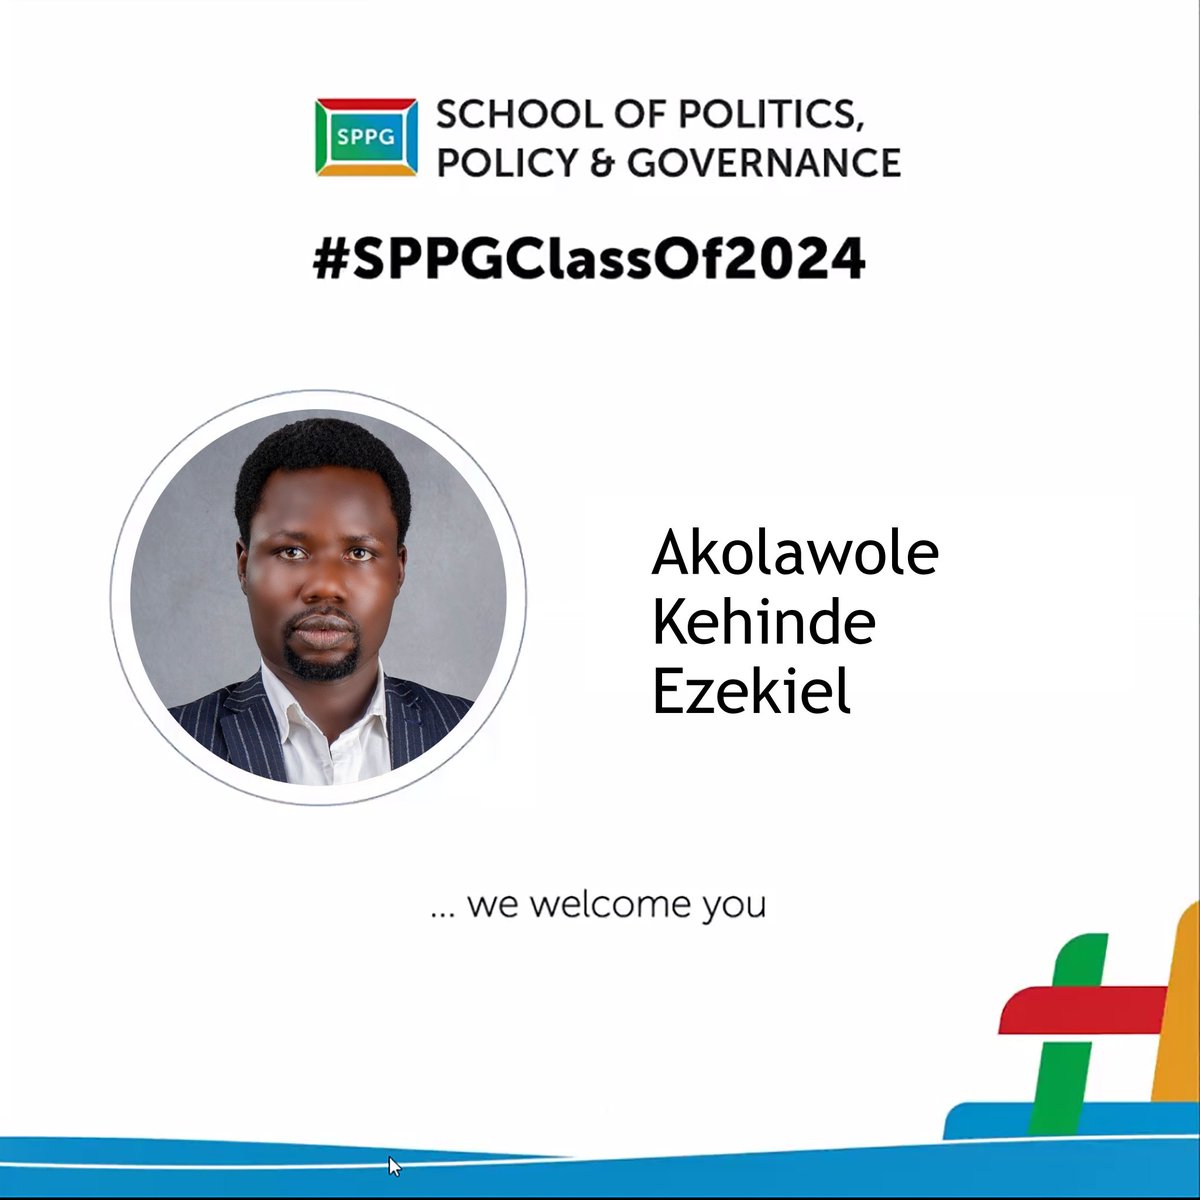 It is my joy to announce that I have now been enrolled as a student at @TheSPPG. Thank you Dr @obyezeks and the entire team at @fixpoliticsnig for such a great initiative that provides a rare opportunity for positive change in our time and beyond.

#sppgclassof2024
#fixpolitics